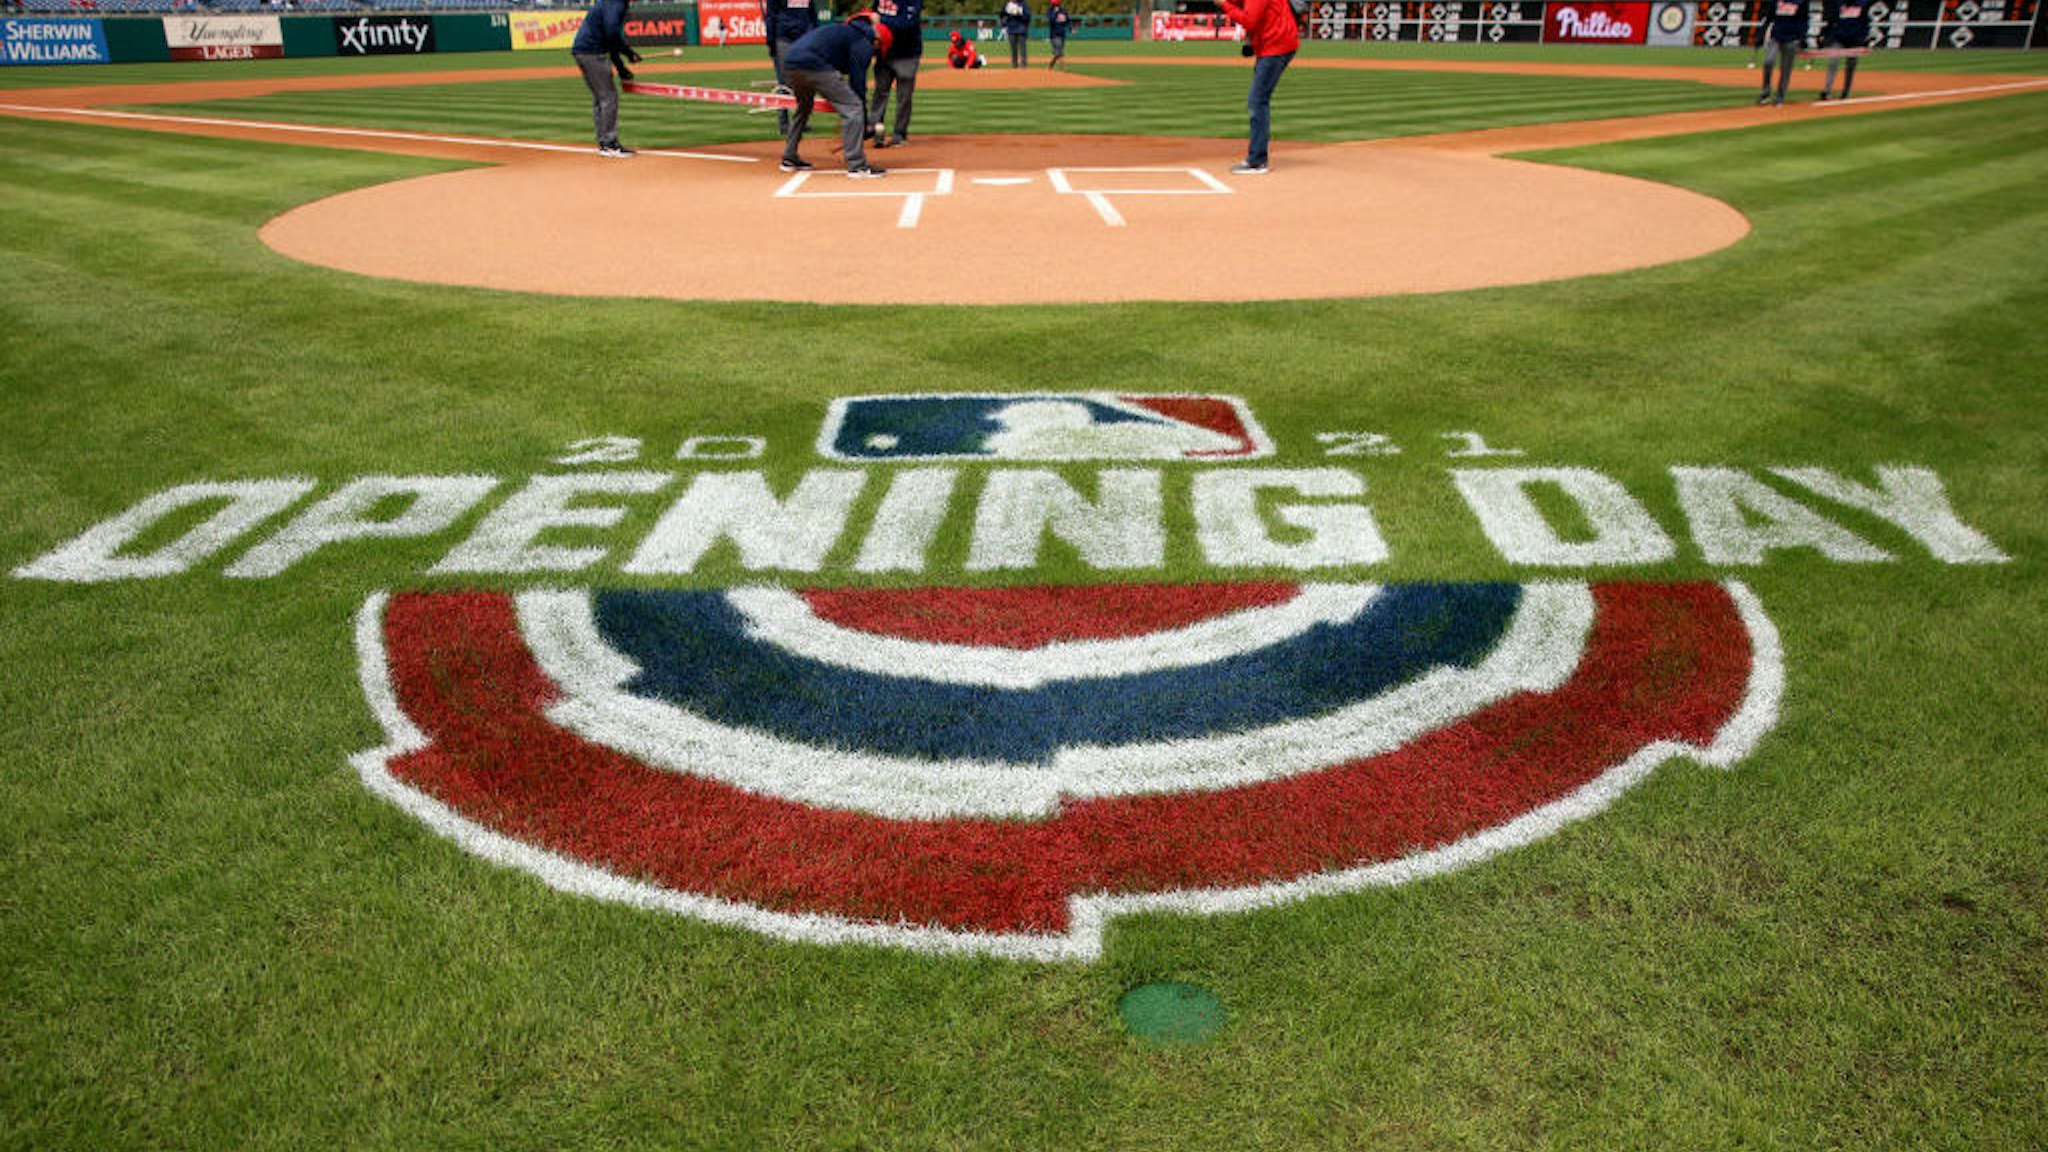 PHILADELPHIA, PA - APRIL 01: A general view of the 2021 Opening Day logo on the field prior to the game between the Atlanta Braves and the Philadelphia Phillies at Citizens Bank Park on Thursday, April 1, 2021 in Philadelphia, Pennsylvania. (Photo by Mary DeCicco/MLB Photos via Getty Images)